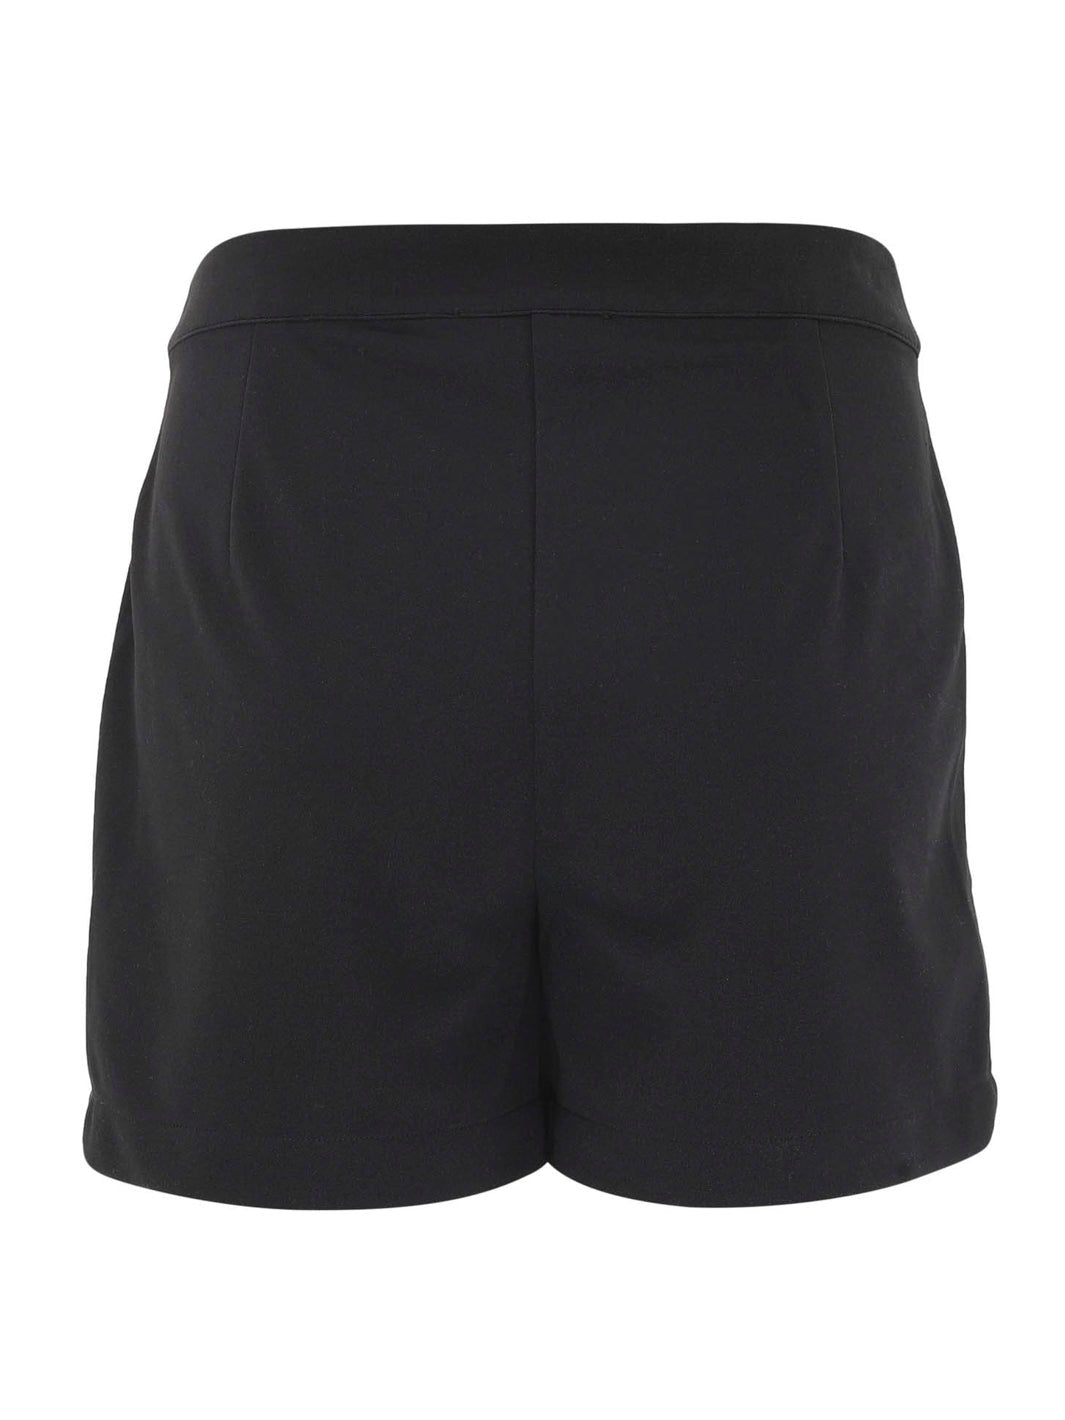 Continue Gabby shorts black - Online-Mode